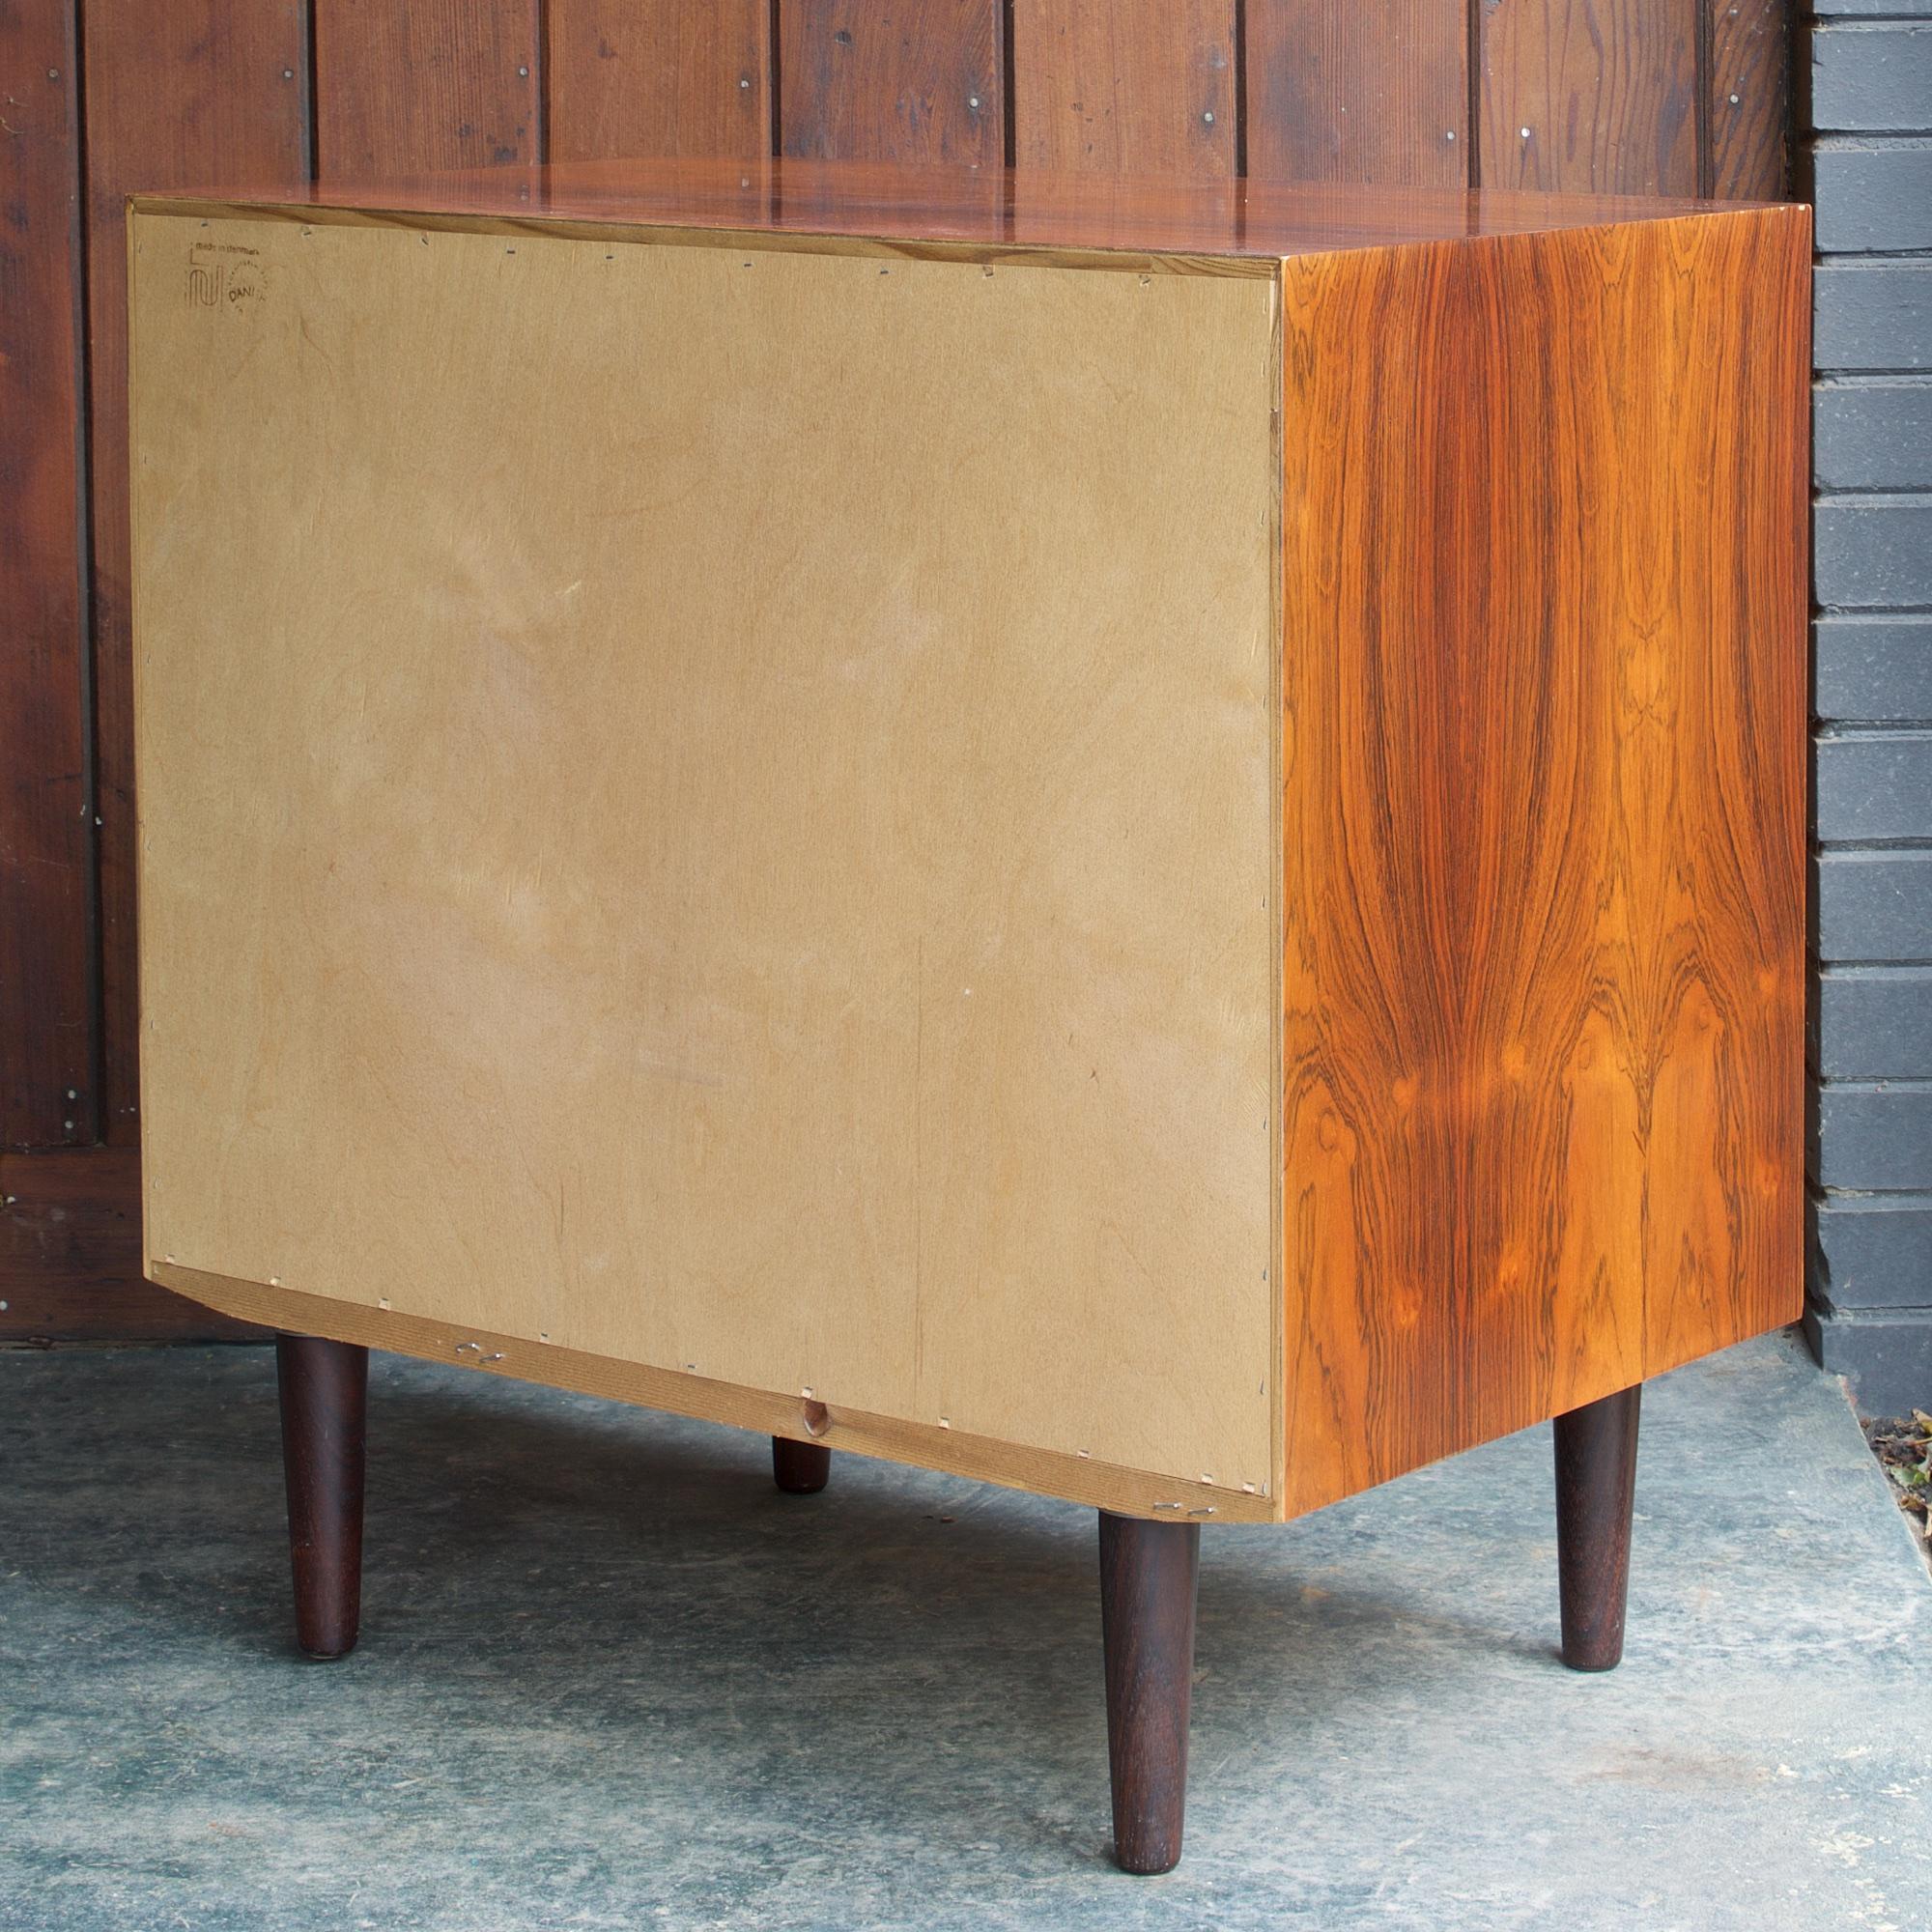 Scandinavian Modern Danish Mid-Century Dresser Cabinet Book Matched Rosewood Chest of Drawers Table